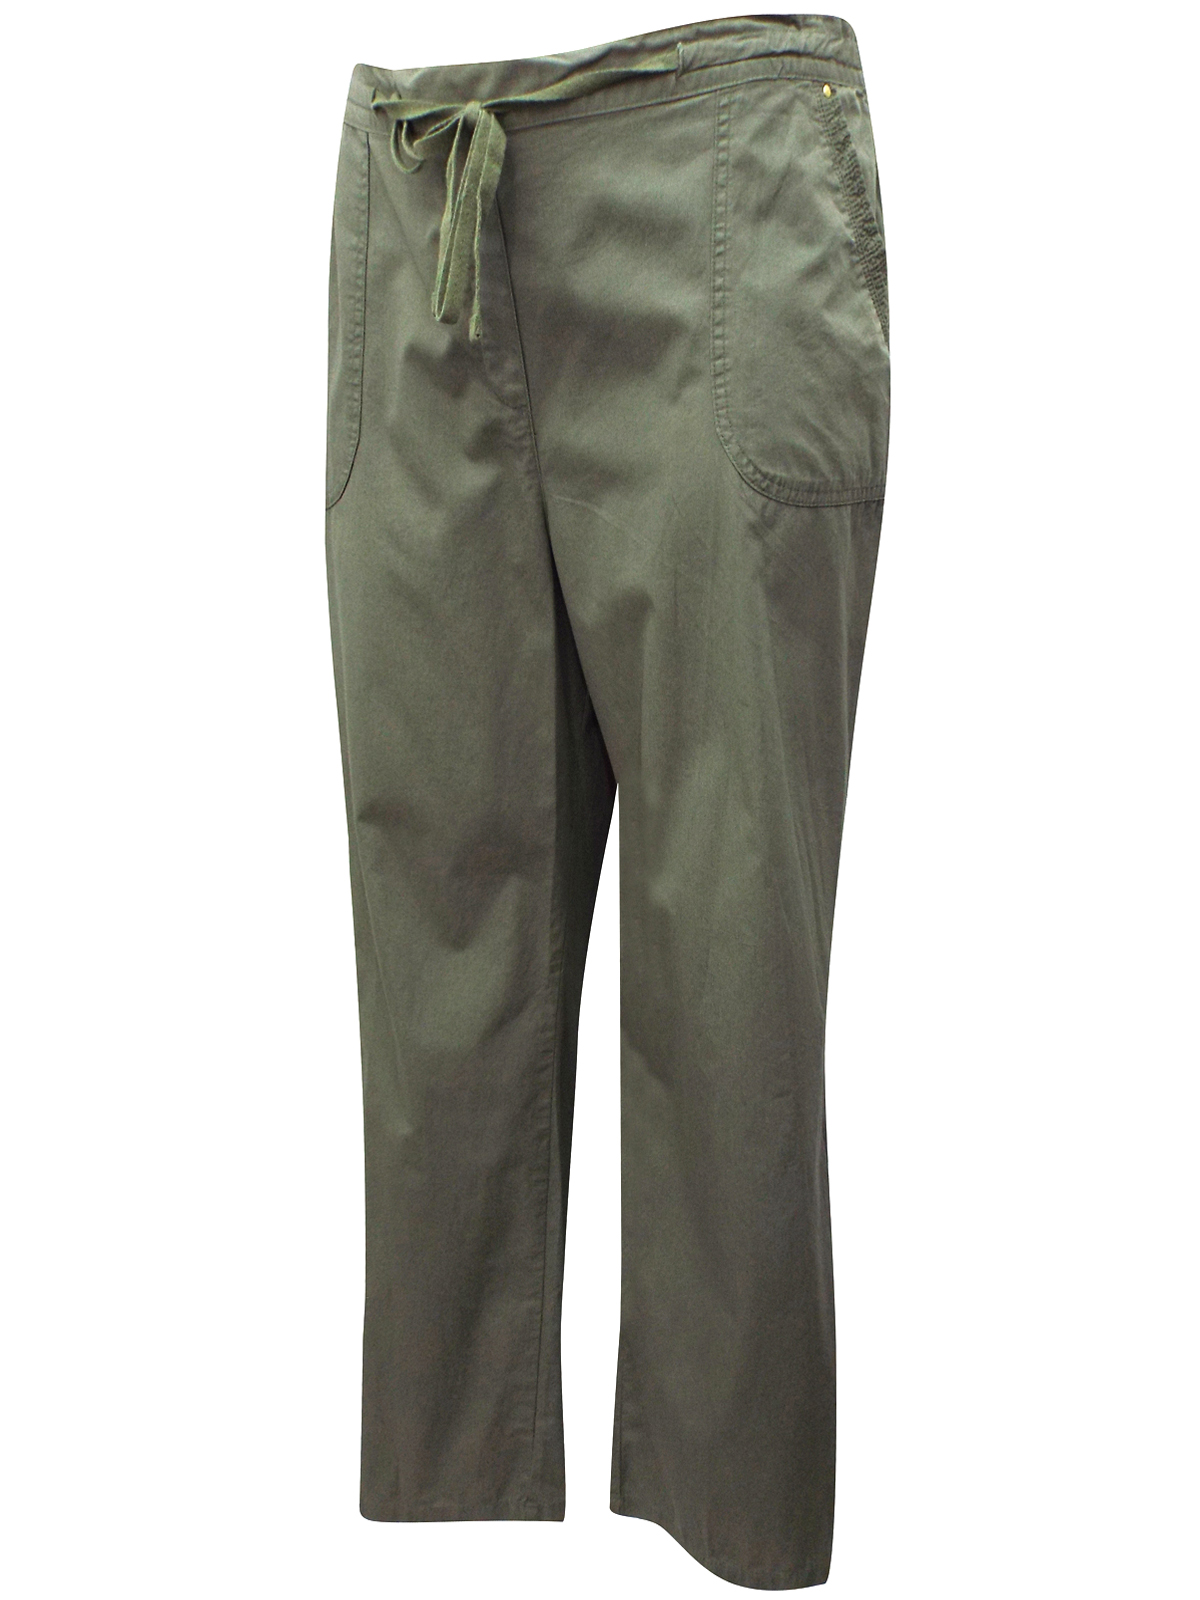 Marks and Spencer - - M&5 KHAKI Pure Cotton Straight Leg Trousers - Size 18